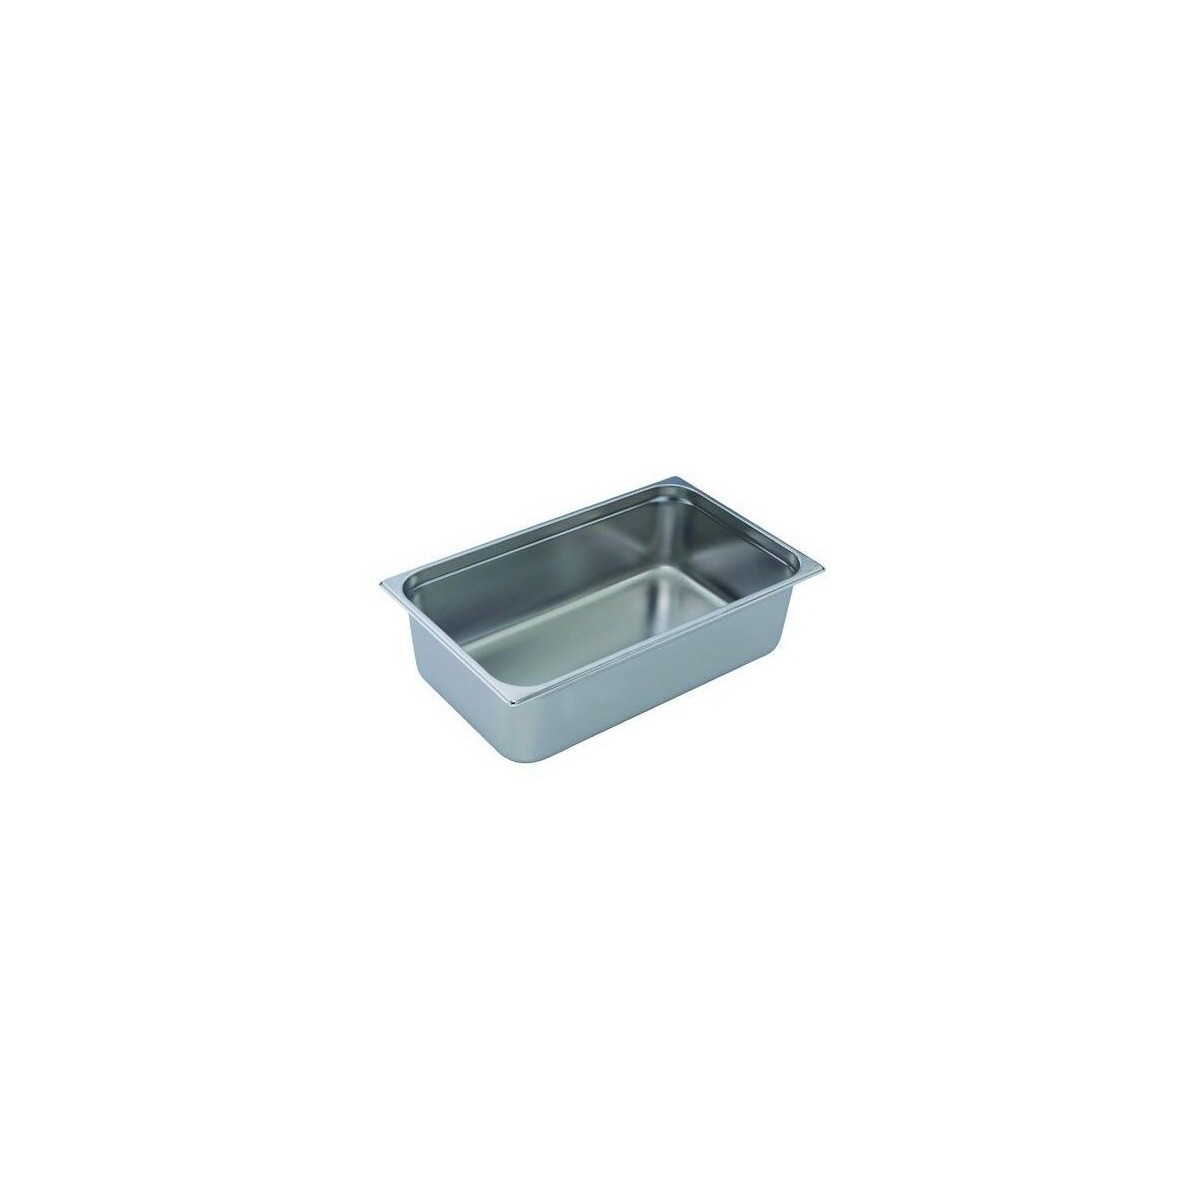 STAINLESS GLASS TRAY 10.5L 360 X 250 X 150